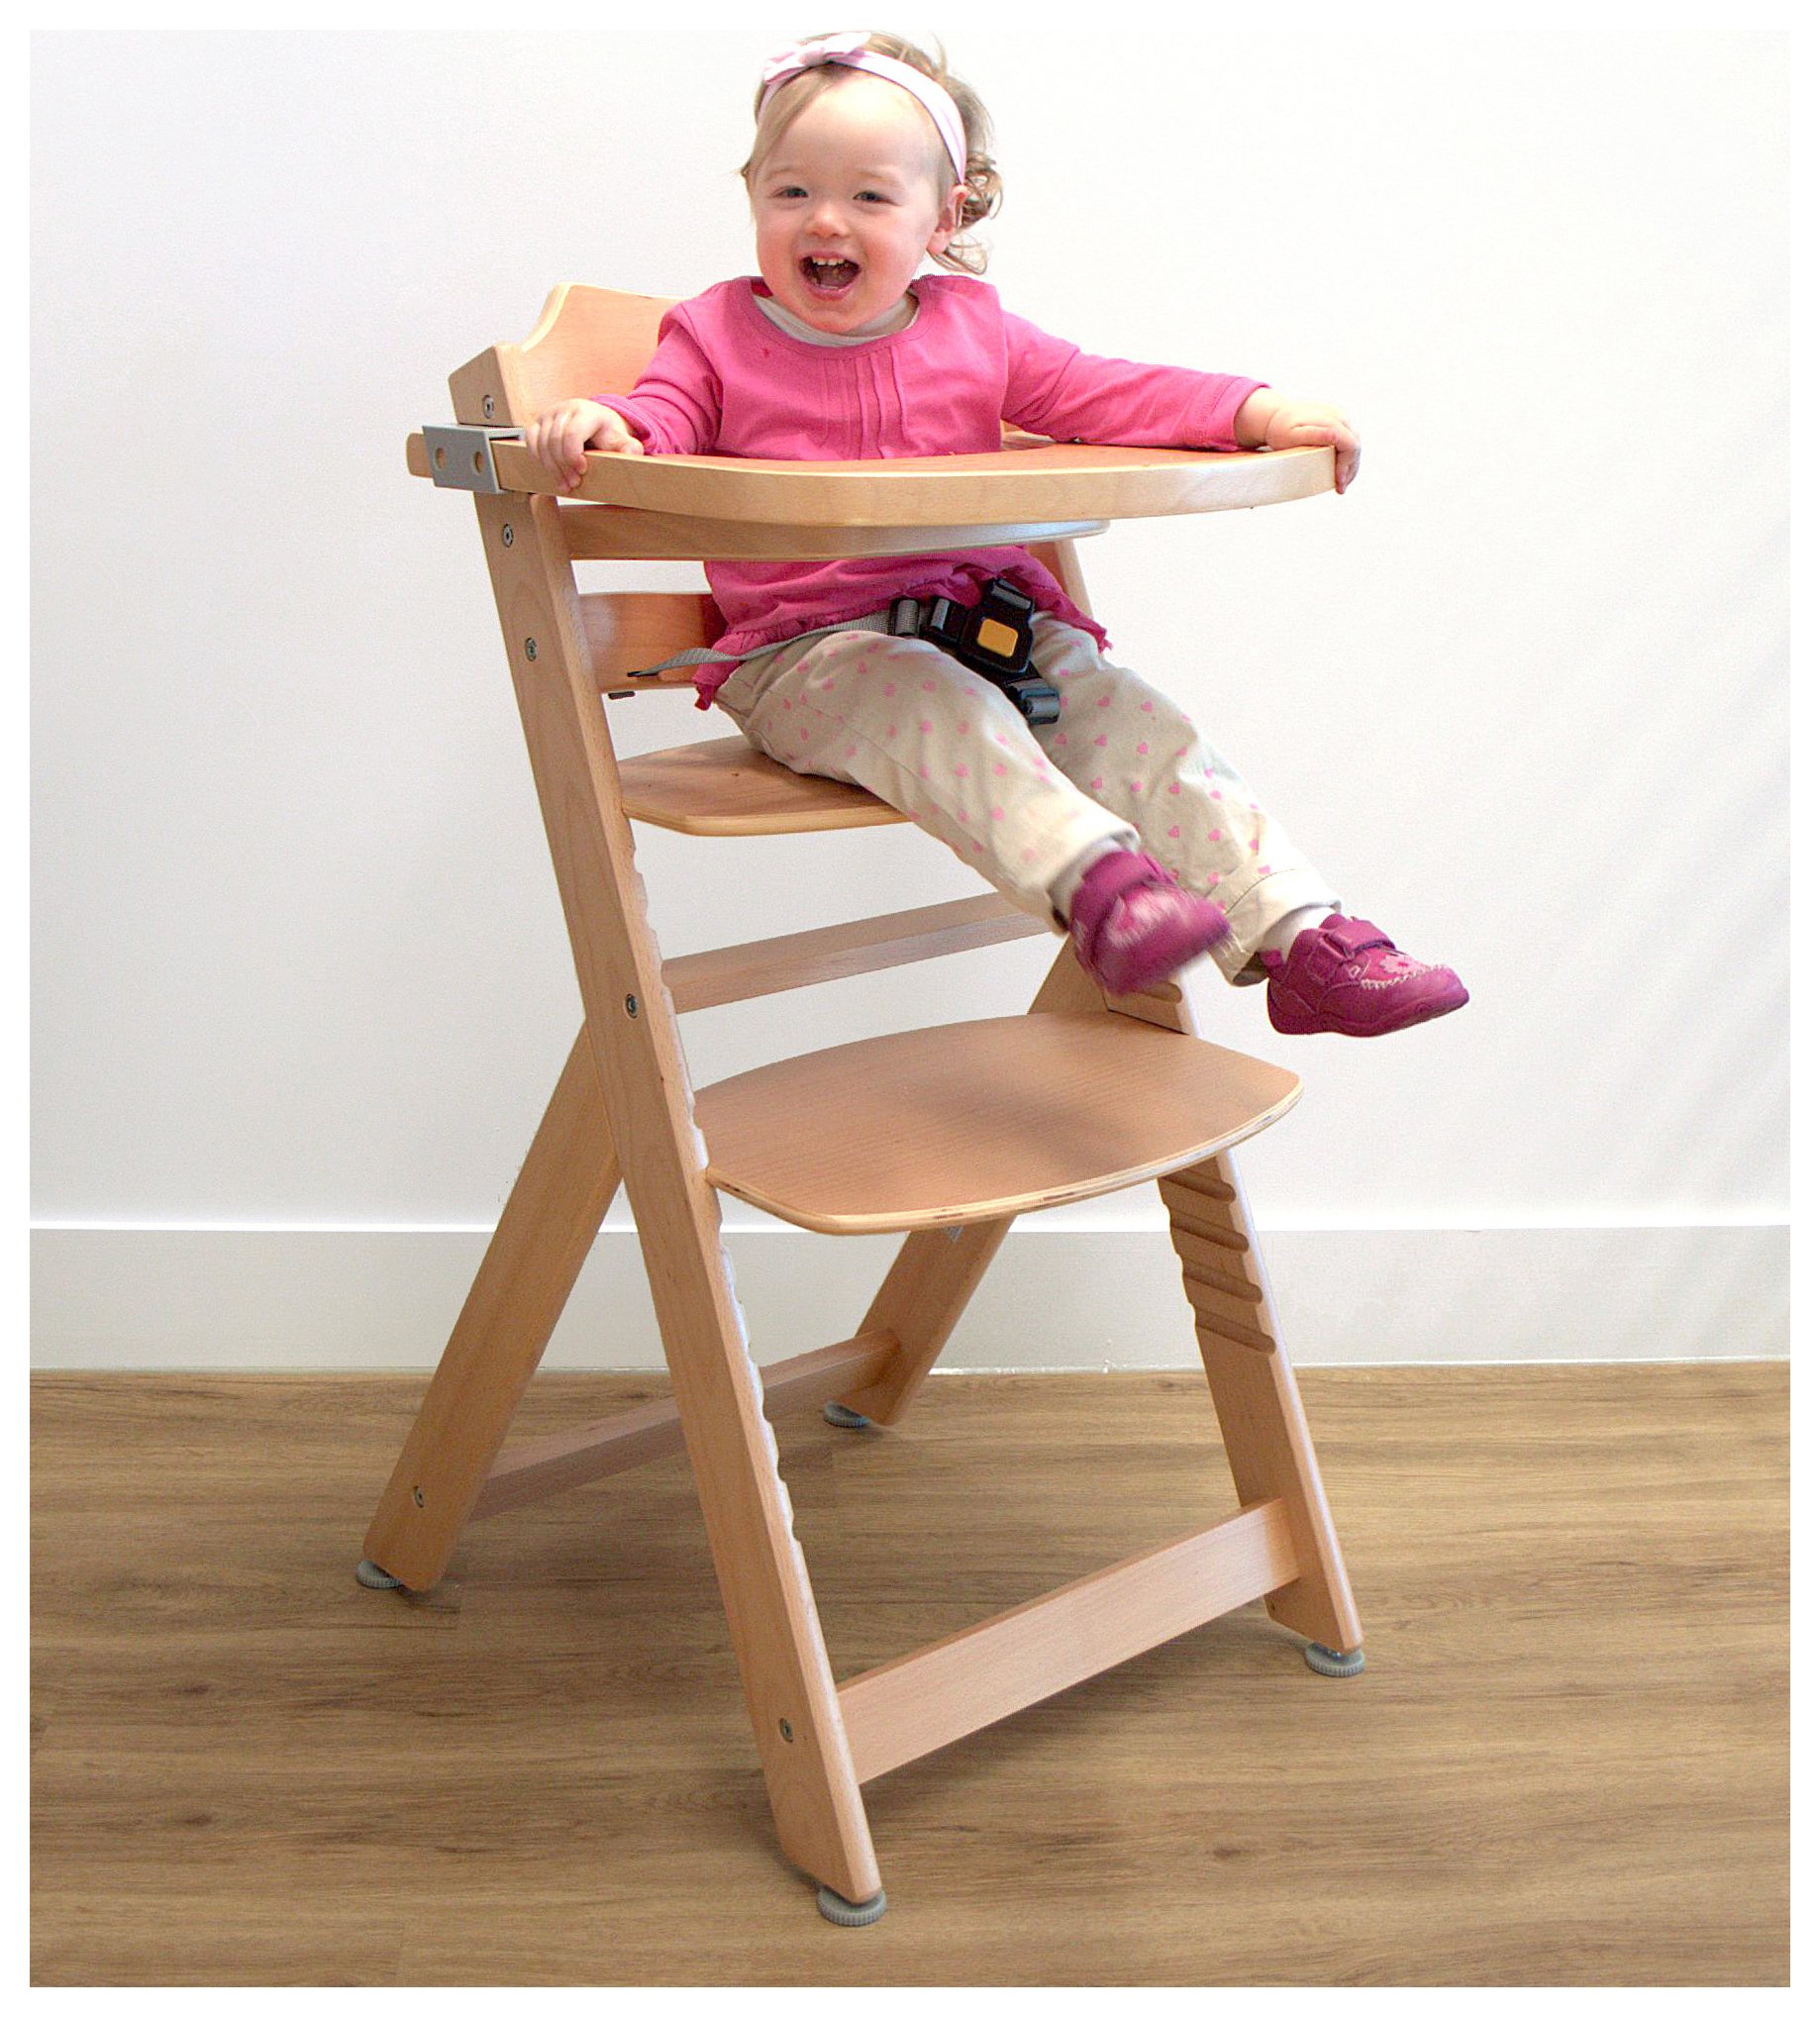 Safety 1st Timba Wooden Highchair Review